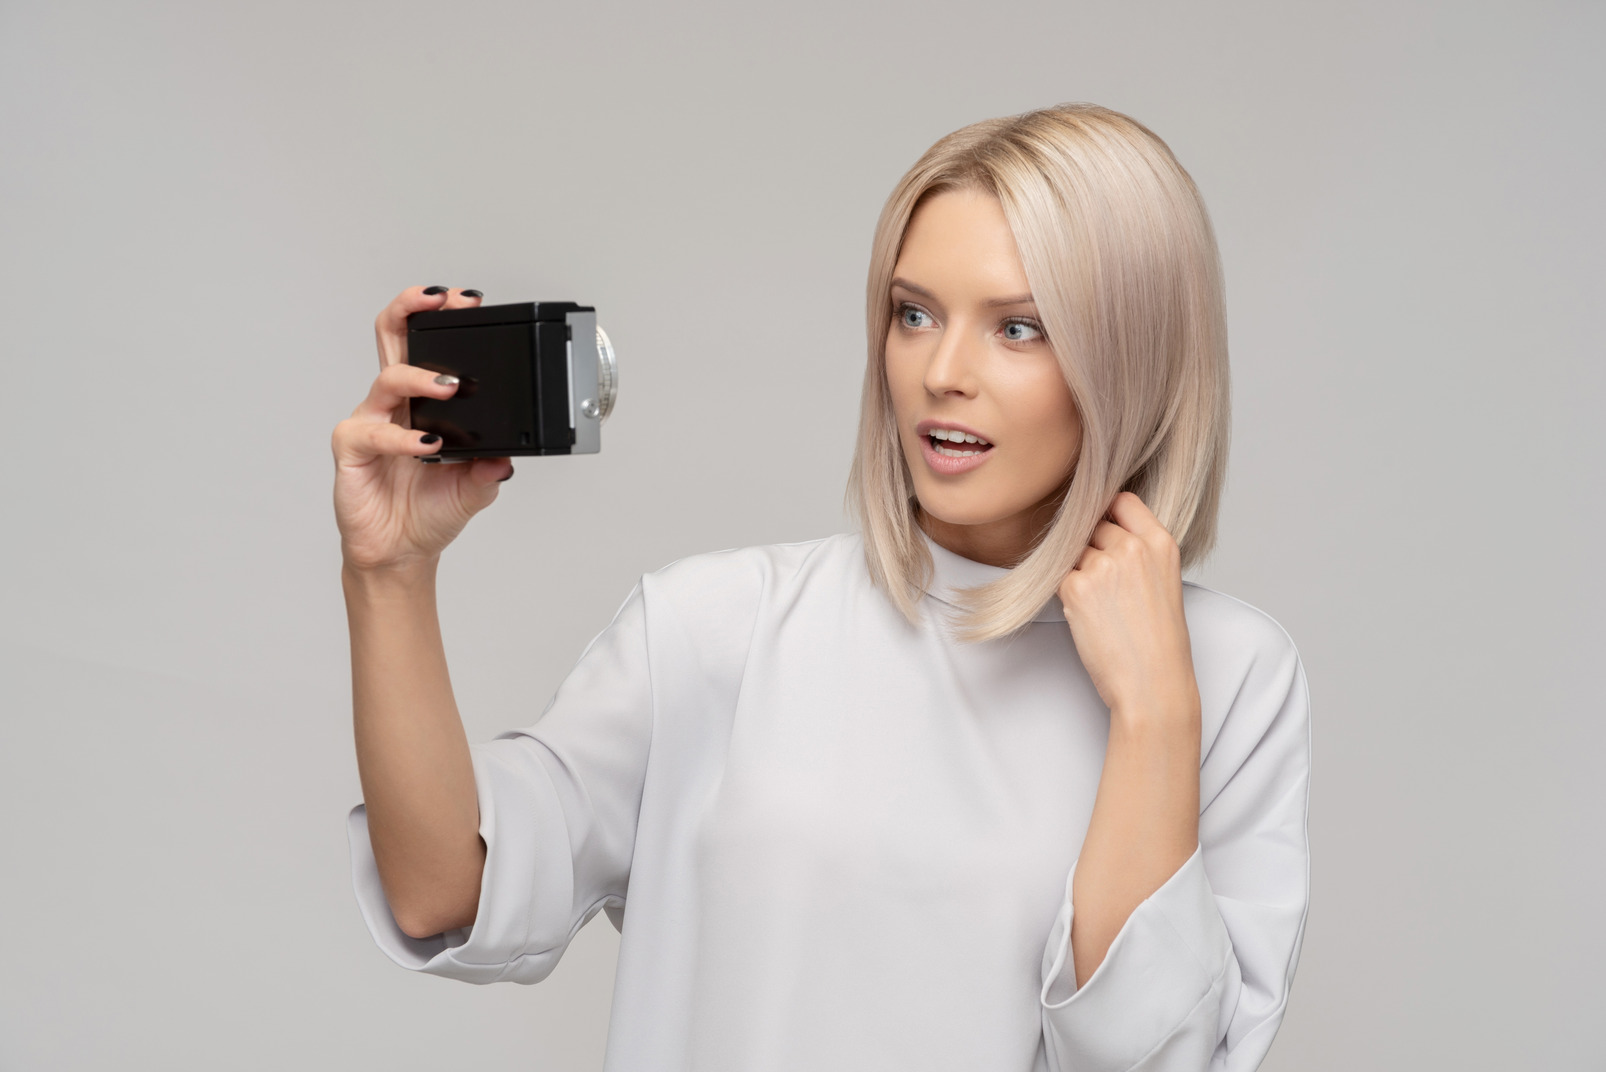 Surprised  woman taking a selfie with an old camera